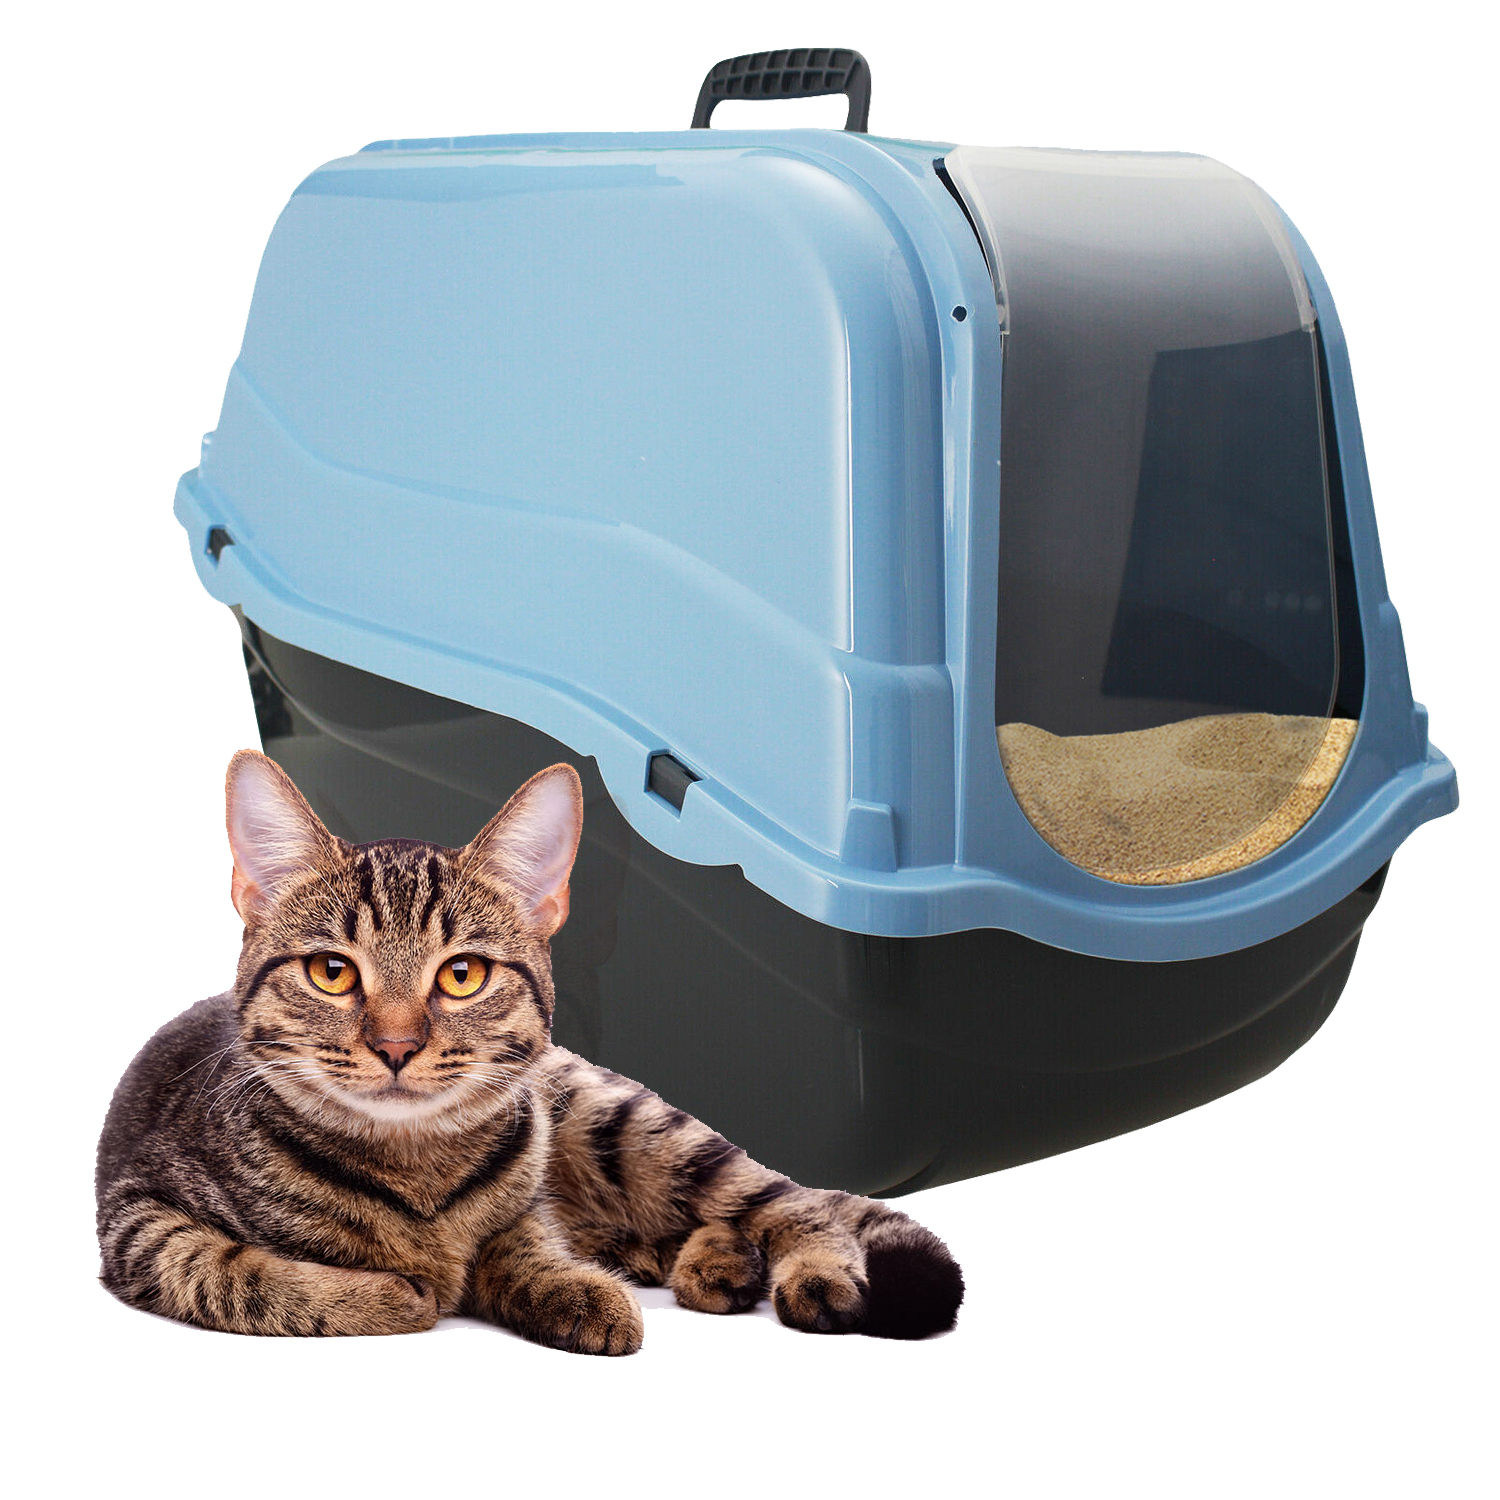 Cat Litter Tray Portable Hooded Box Covered Hand Carry